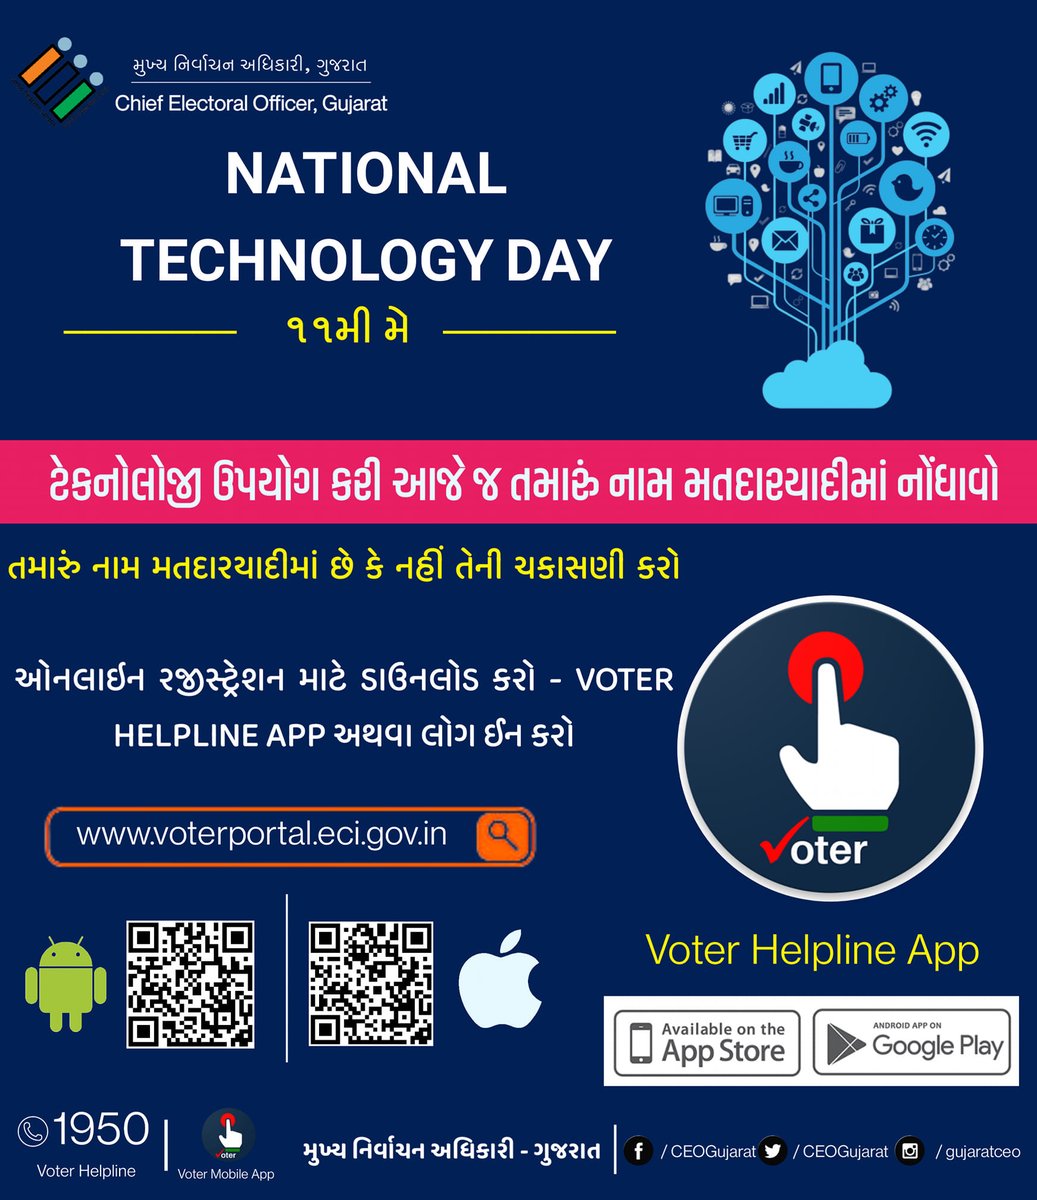 National Technology Day - 11th May

#NationalTechnologyDay #CEOGujarat #ElectionDepartment #VoterHelplineApp #GoRegister